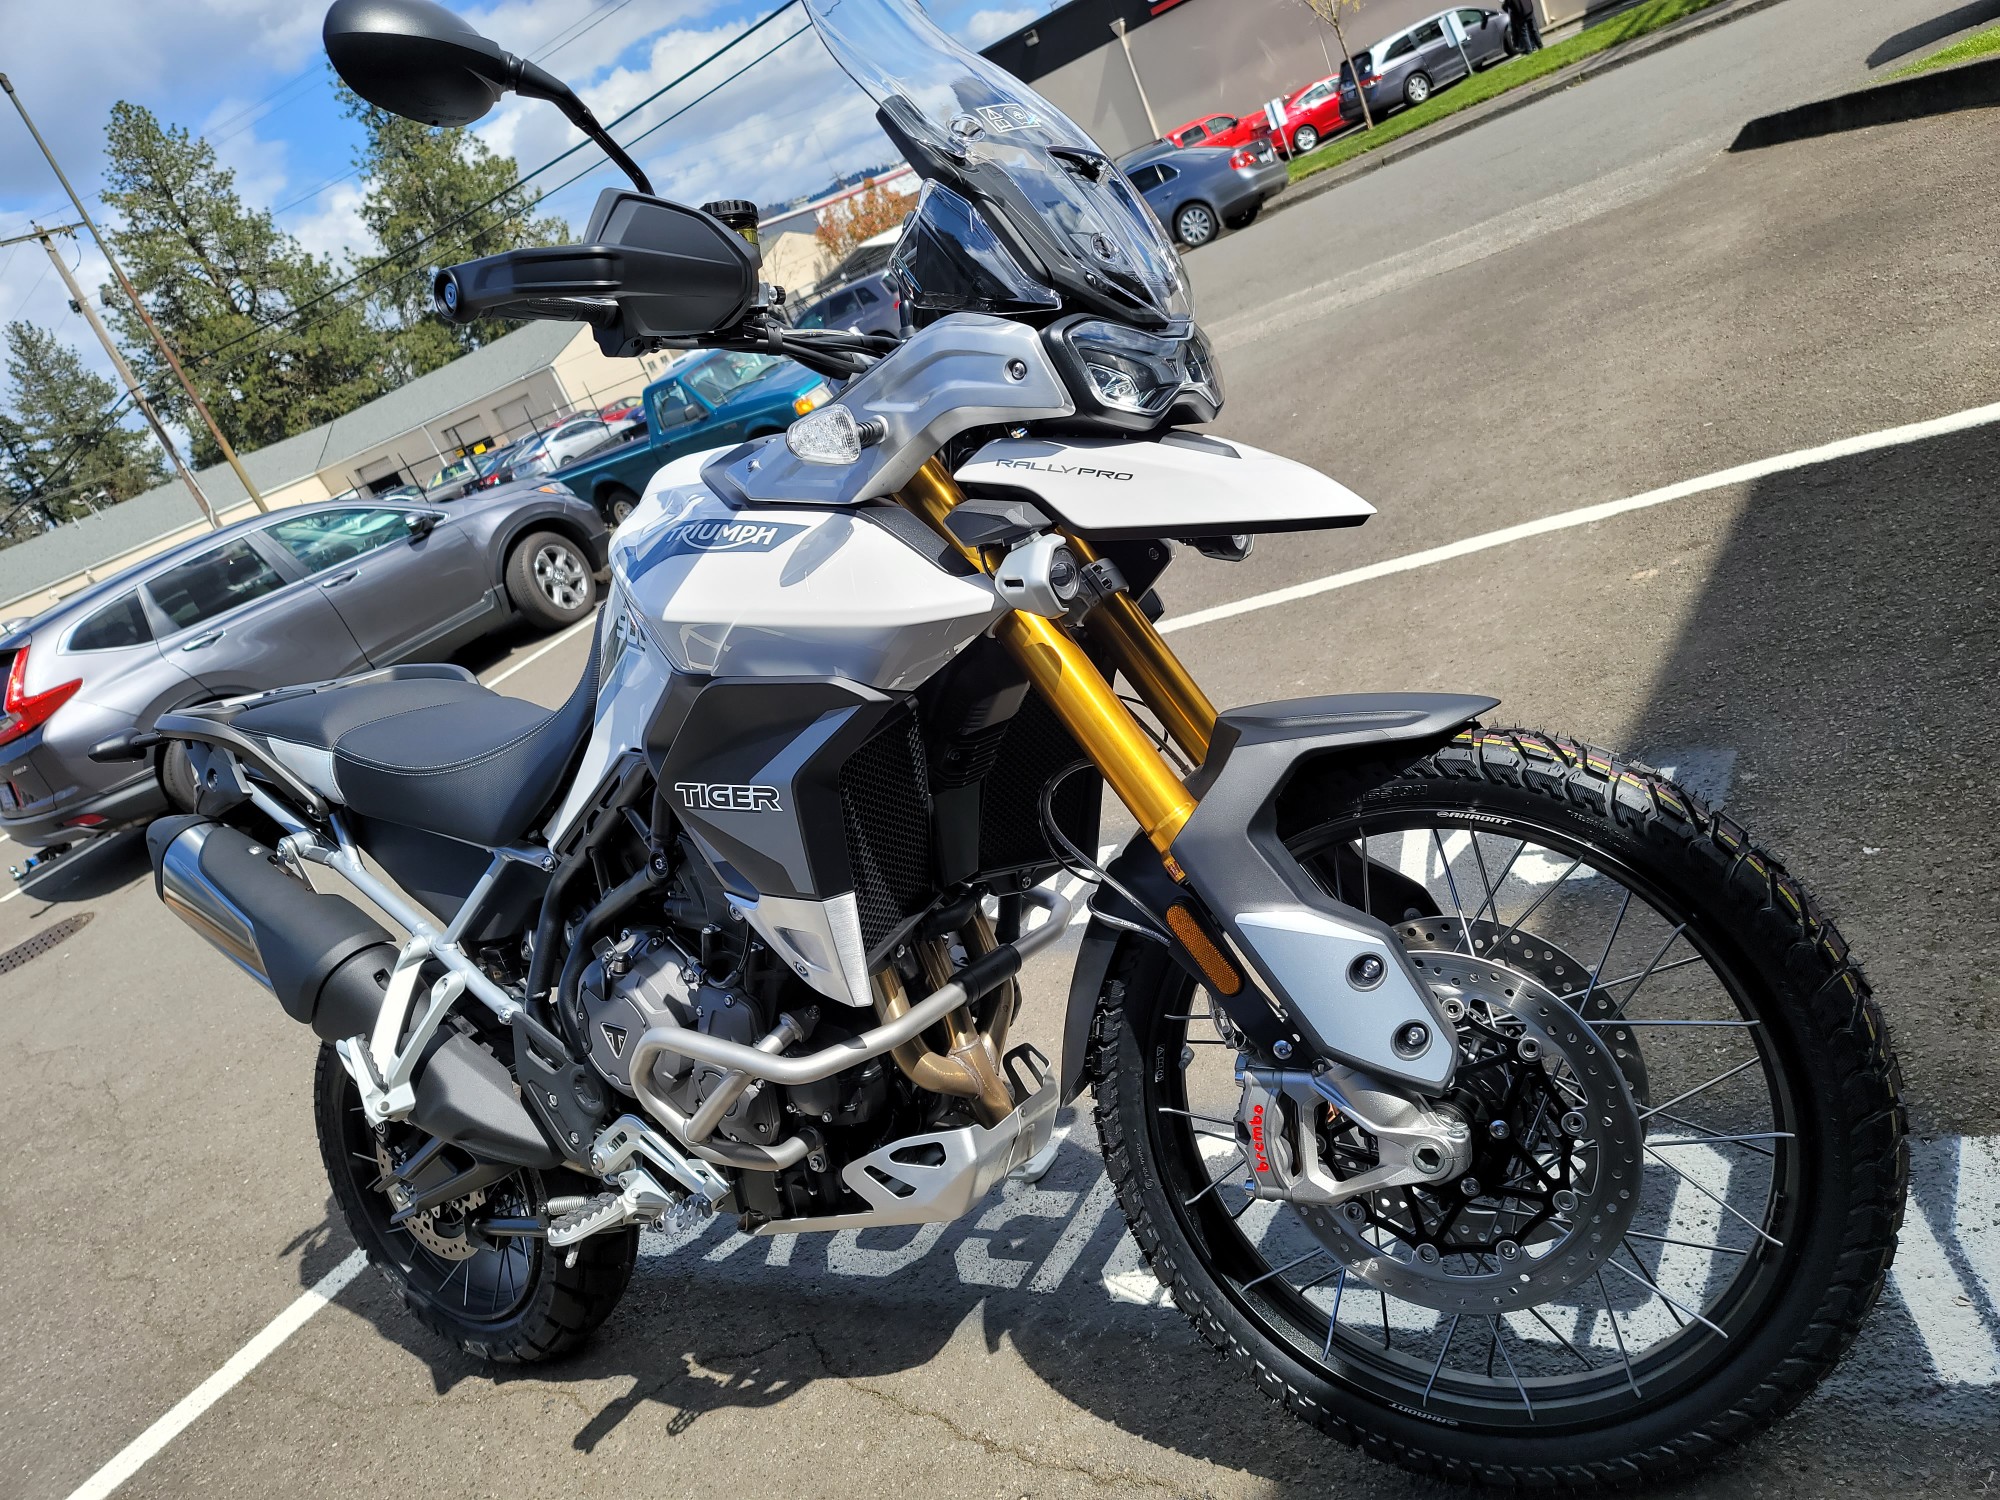 Motorcycle at dealer ready for pickup